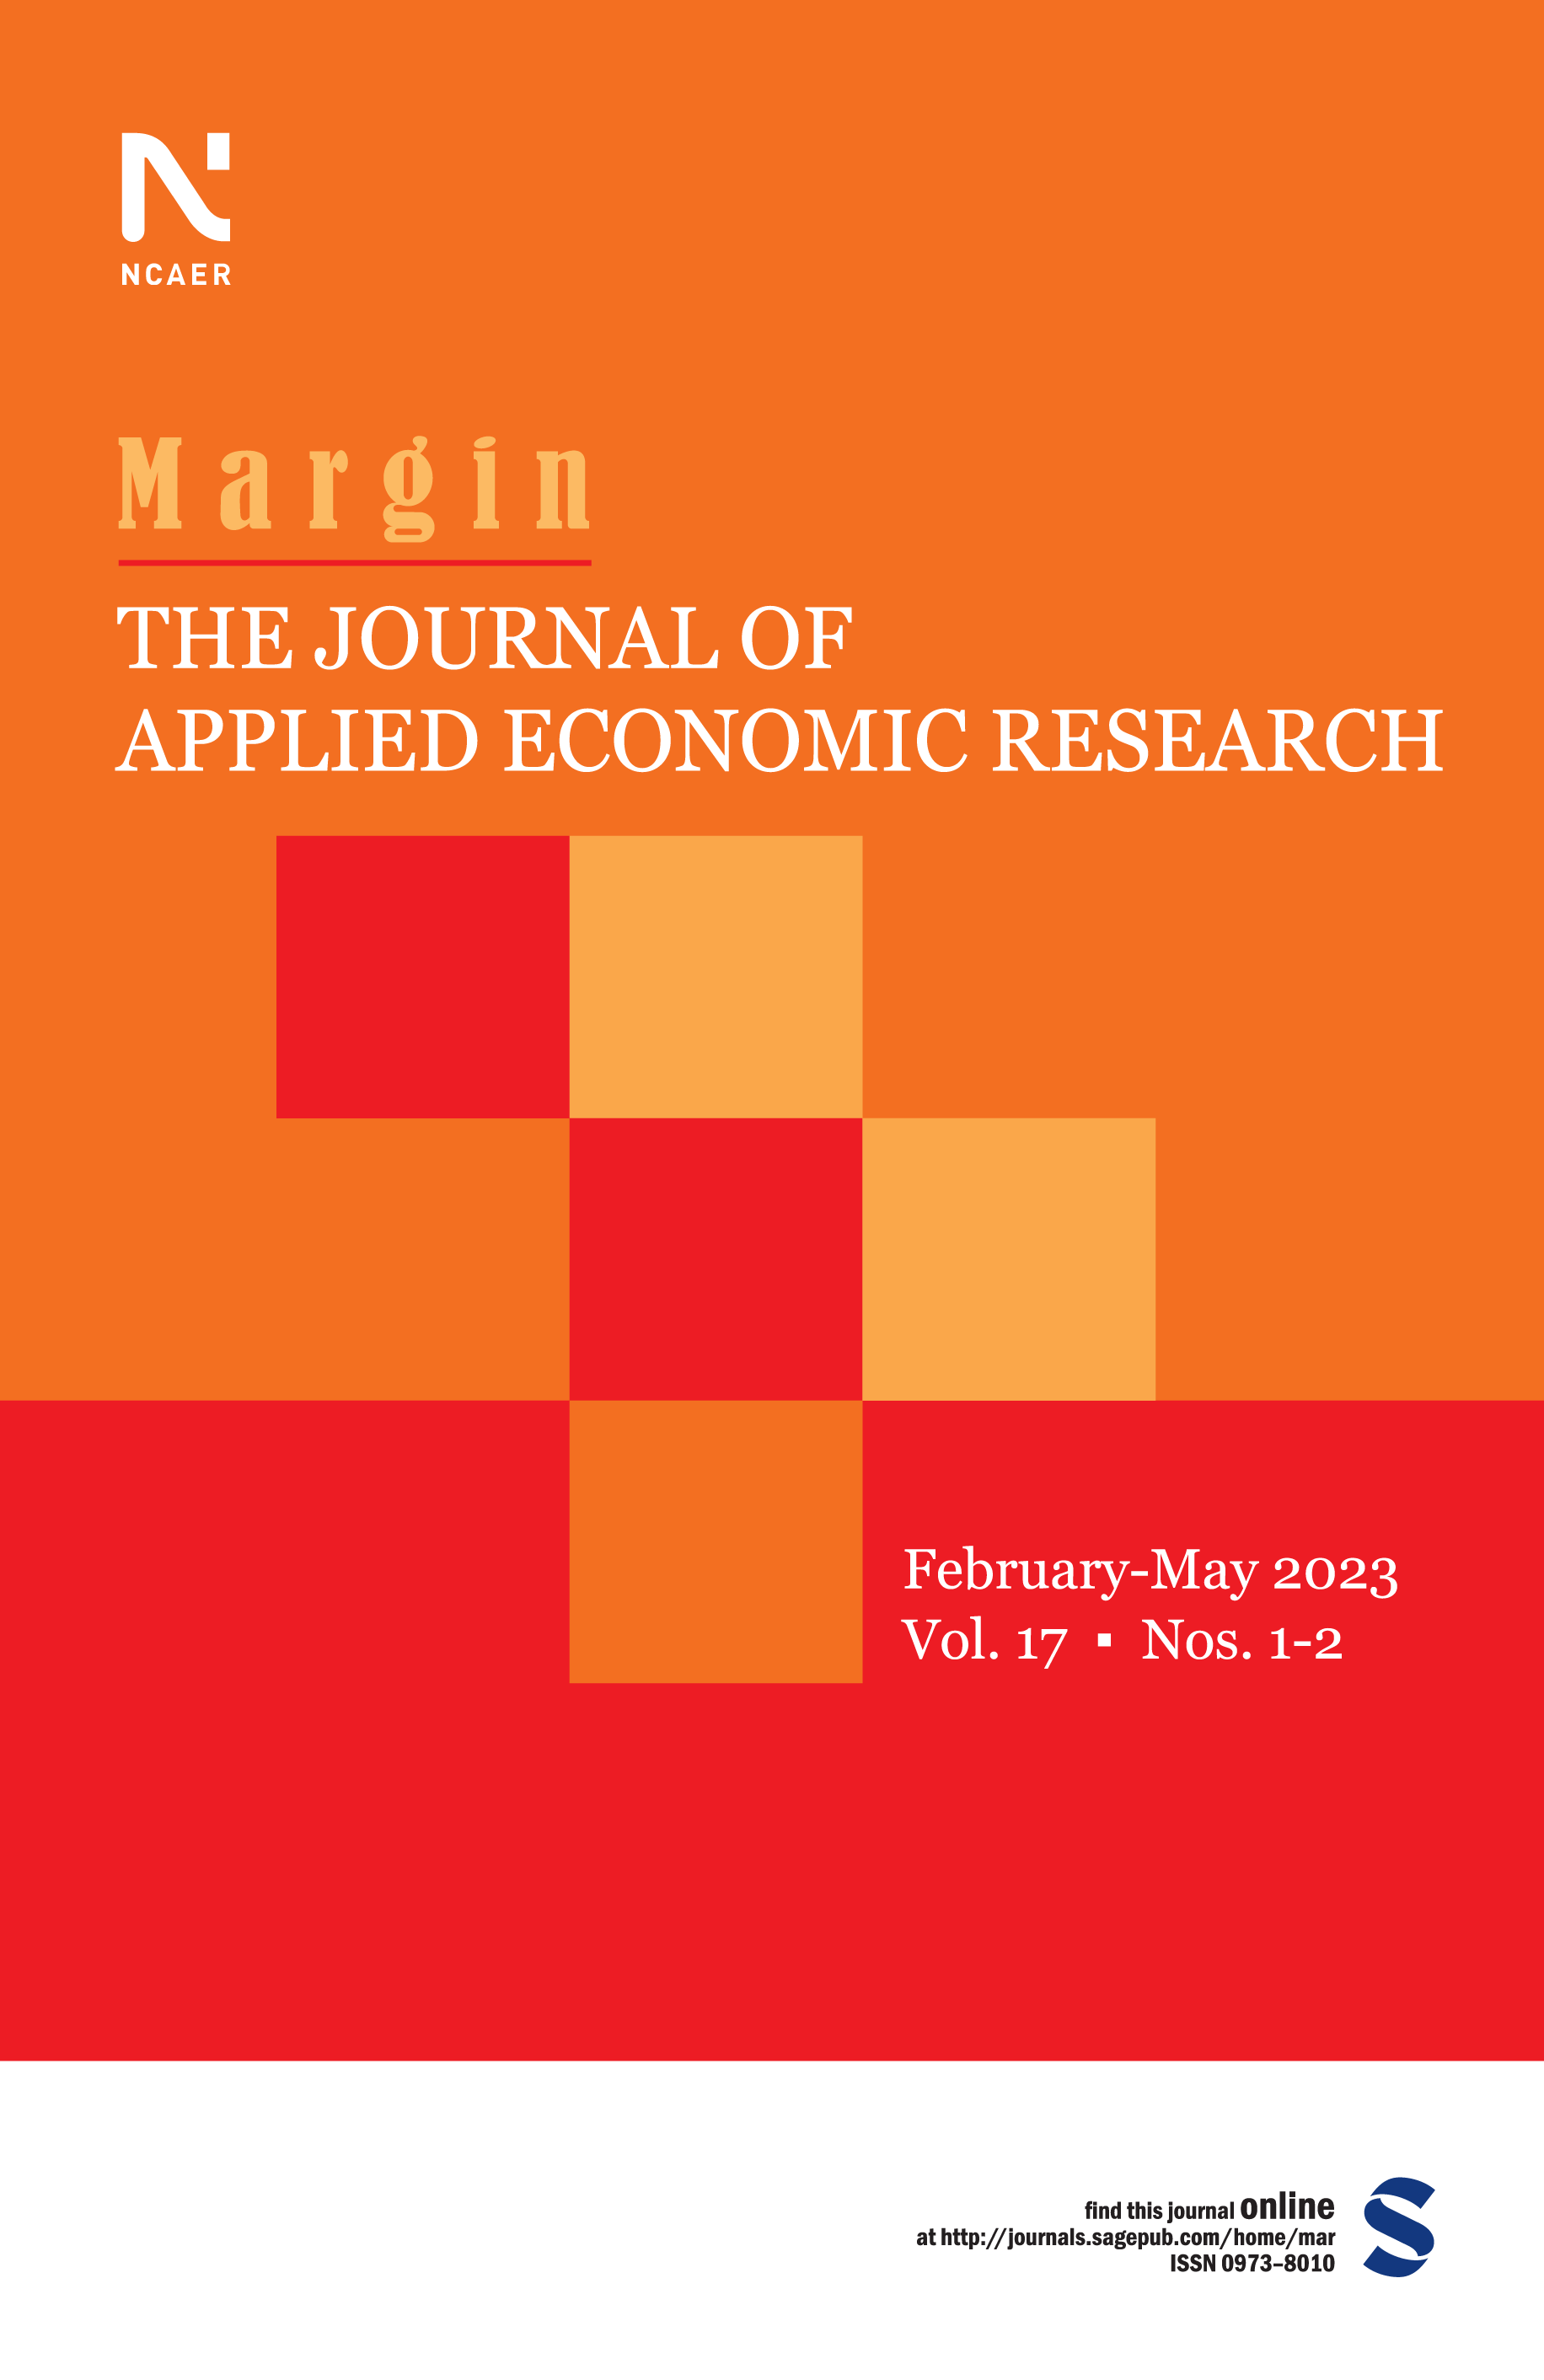 Margin the journal of applied economic research.